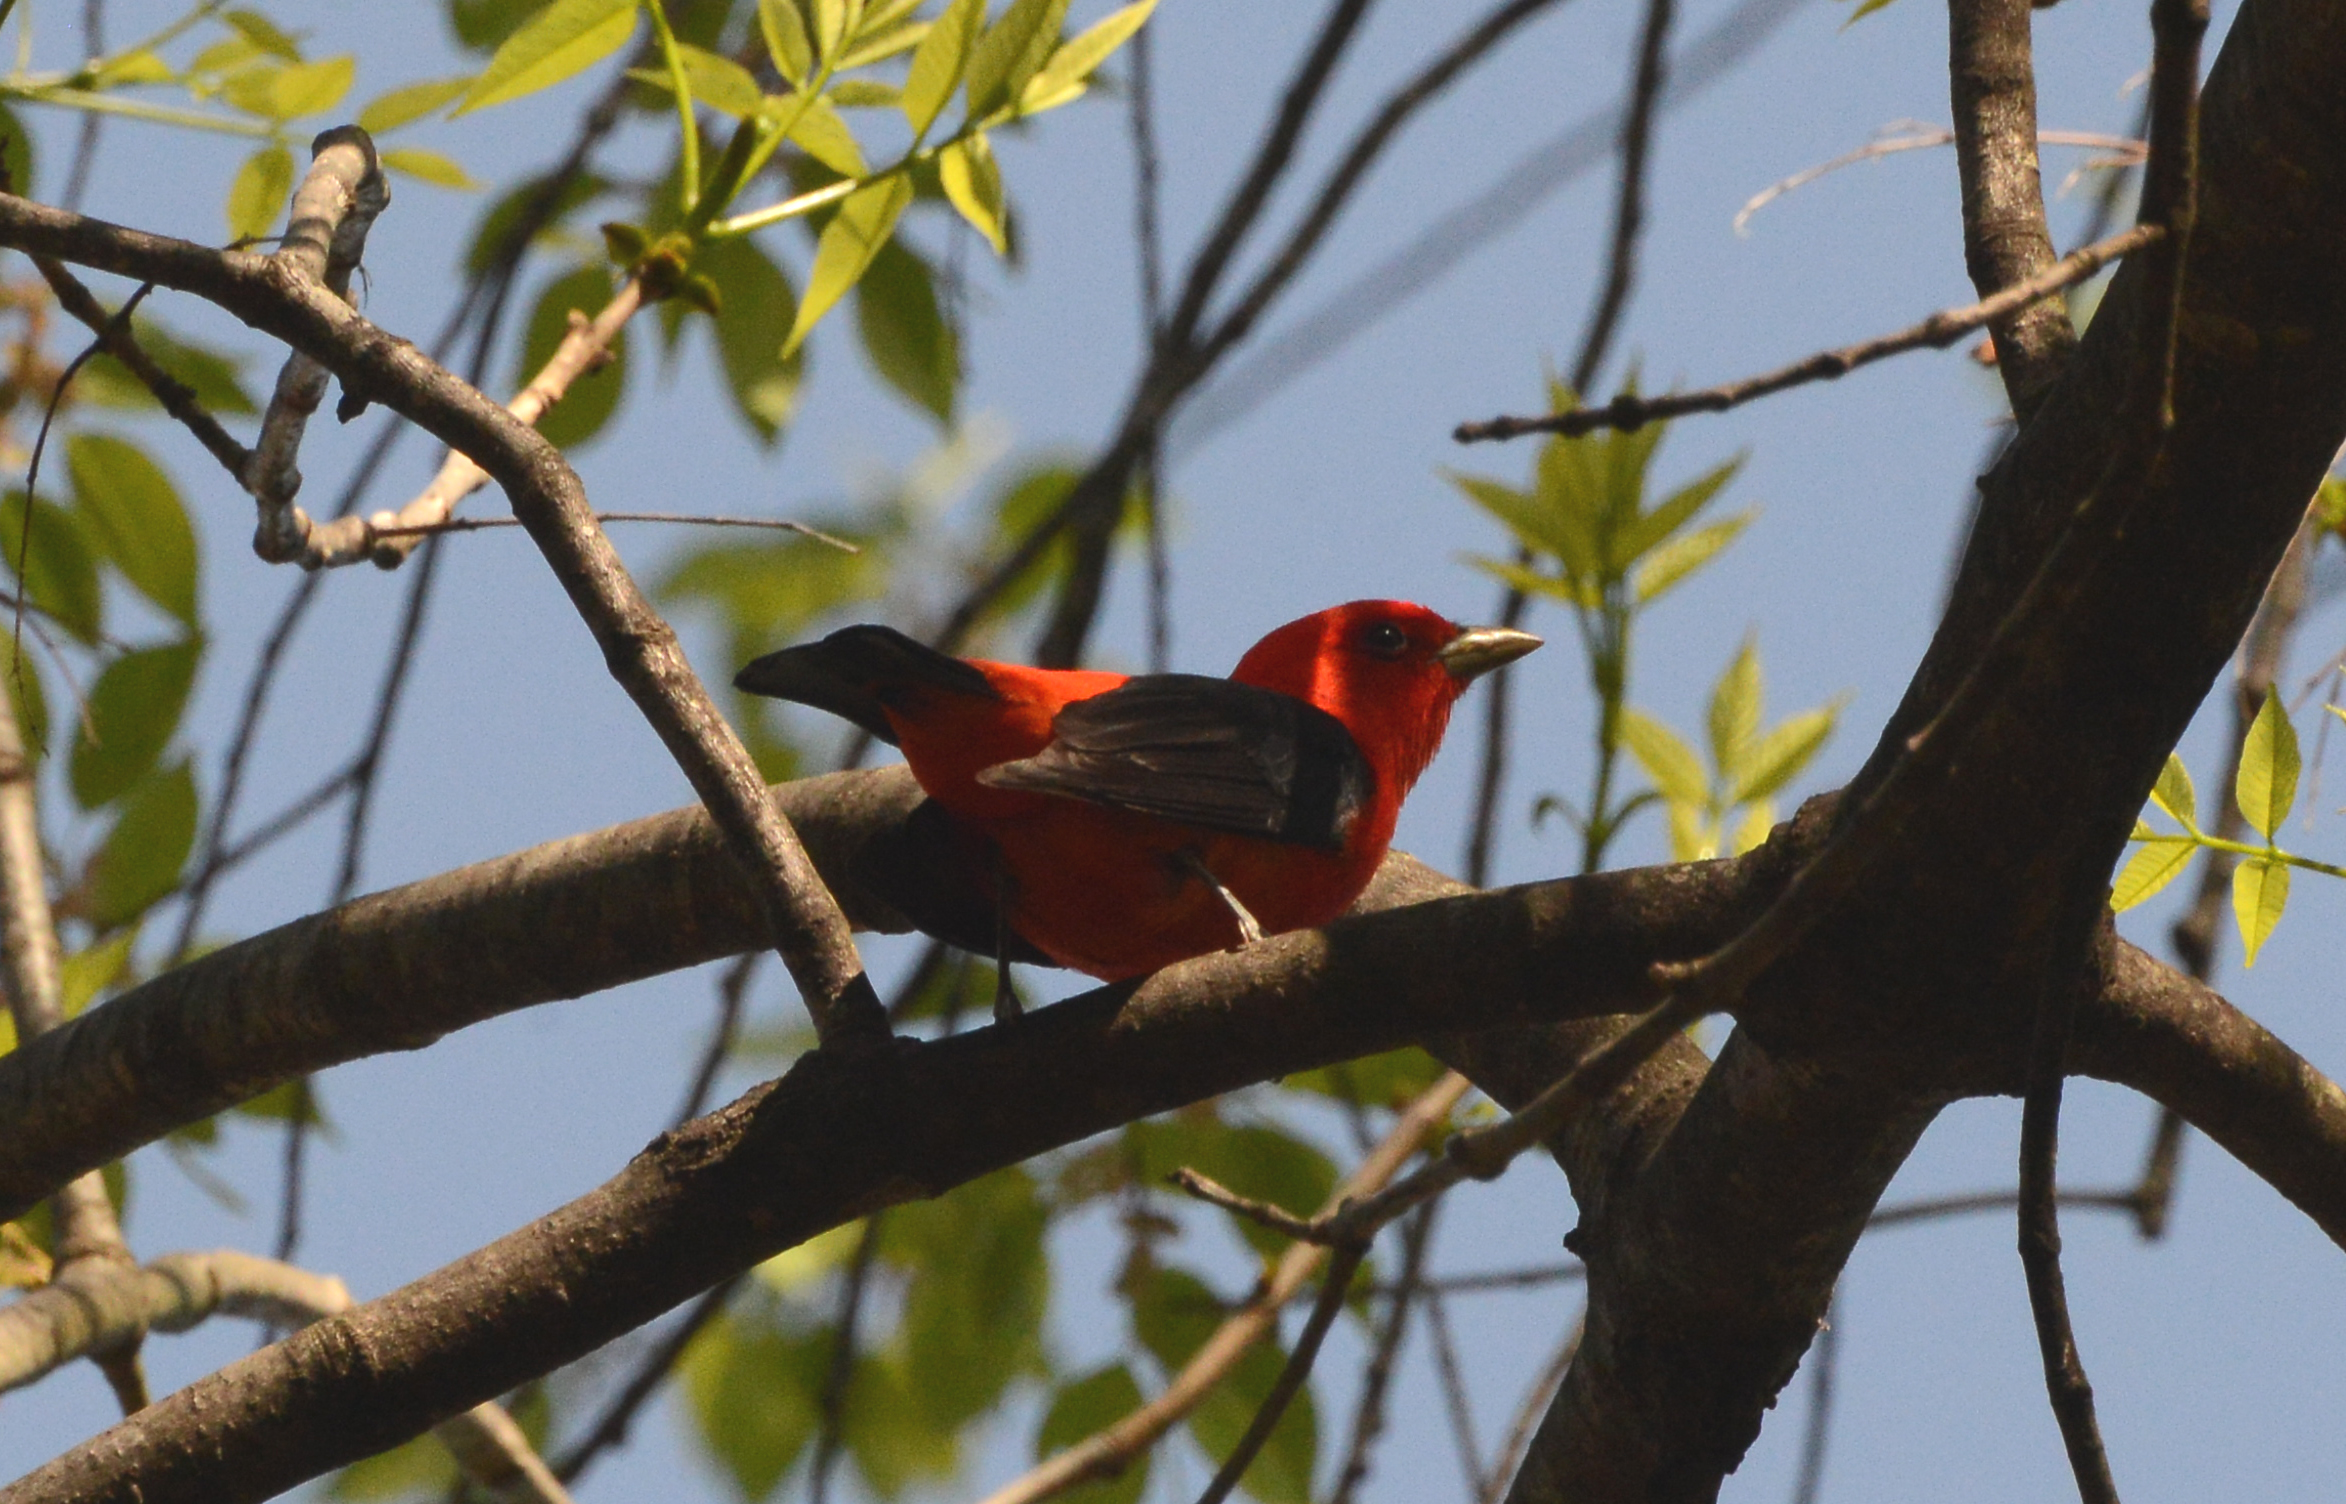 Scarlet Tanager Identification, All About Birds, Cornell Lab of